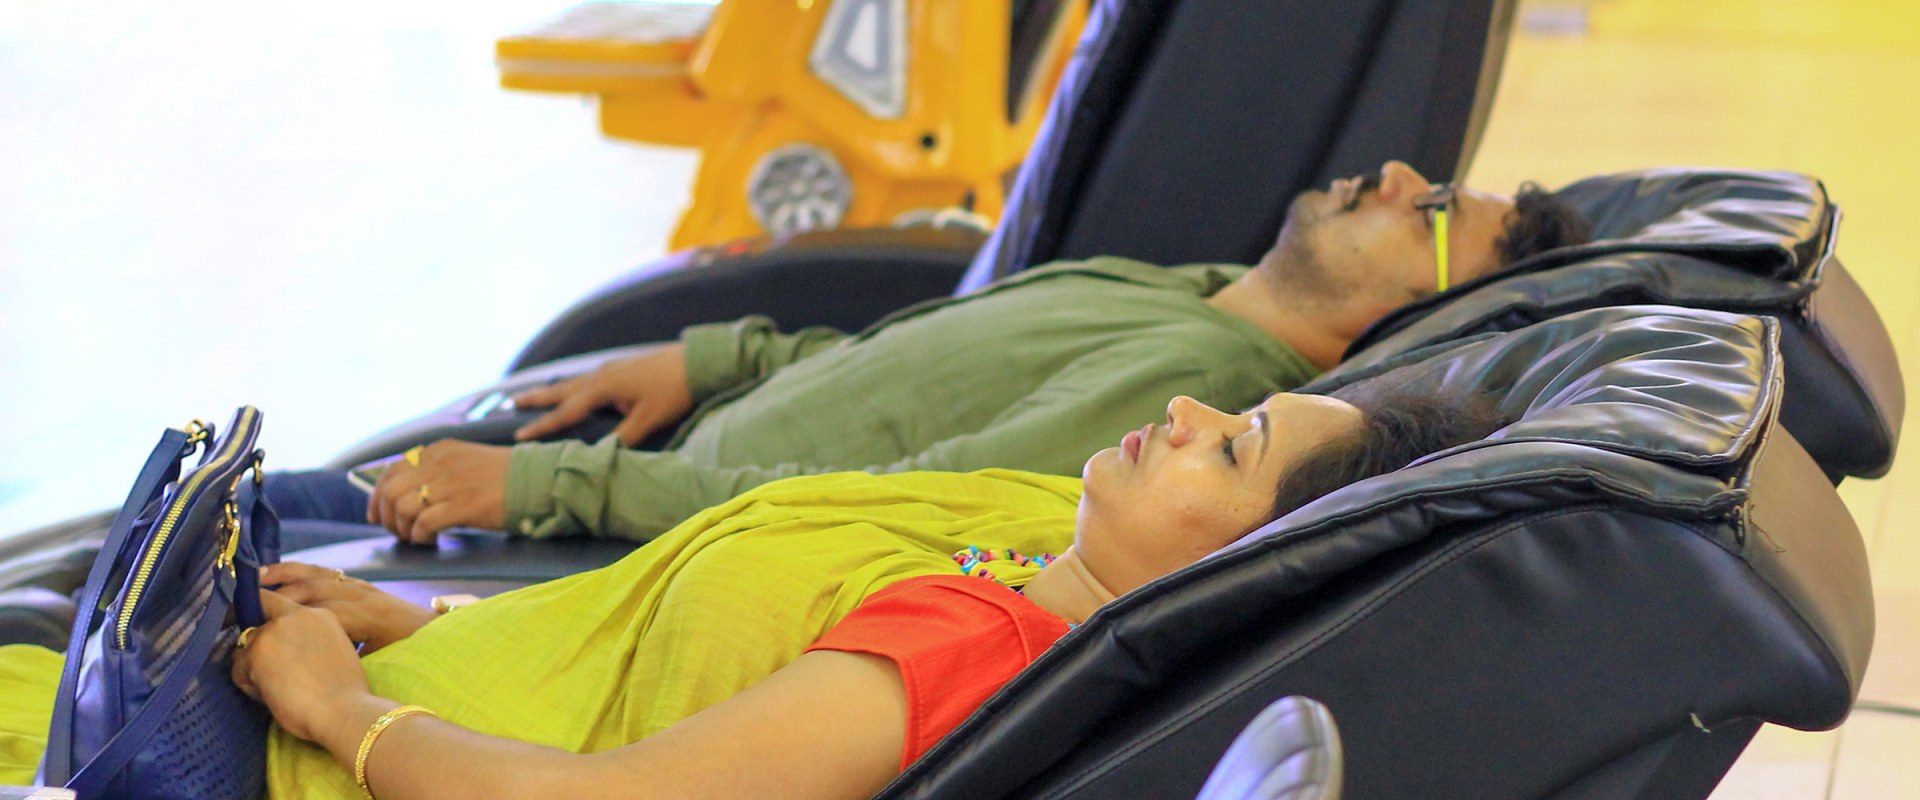 Can Massage Chairs Cause Damage?